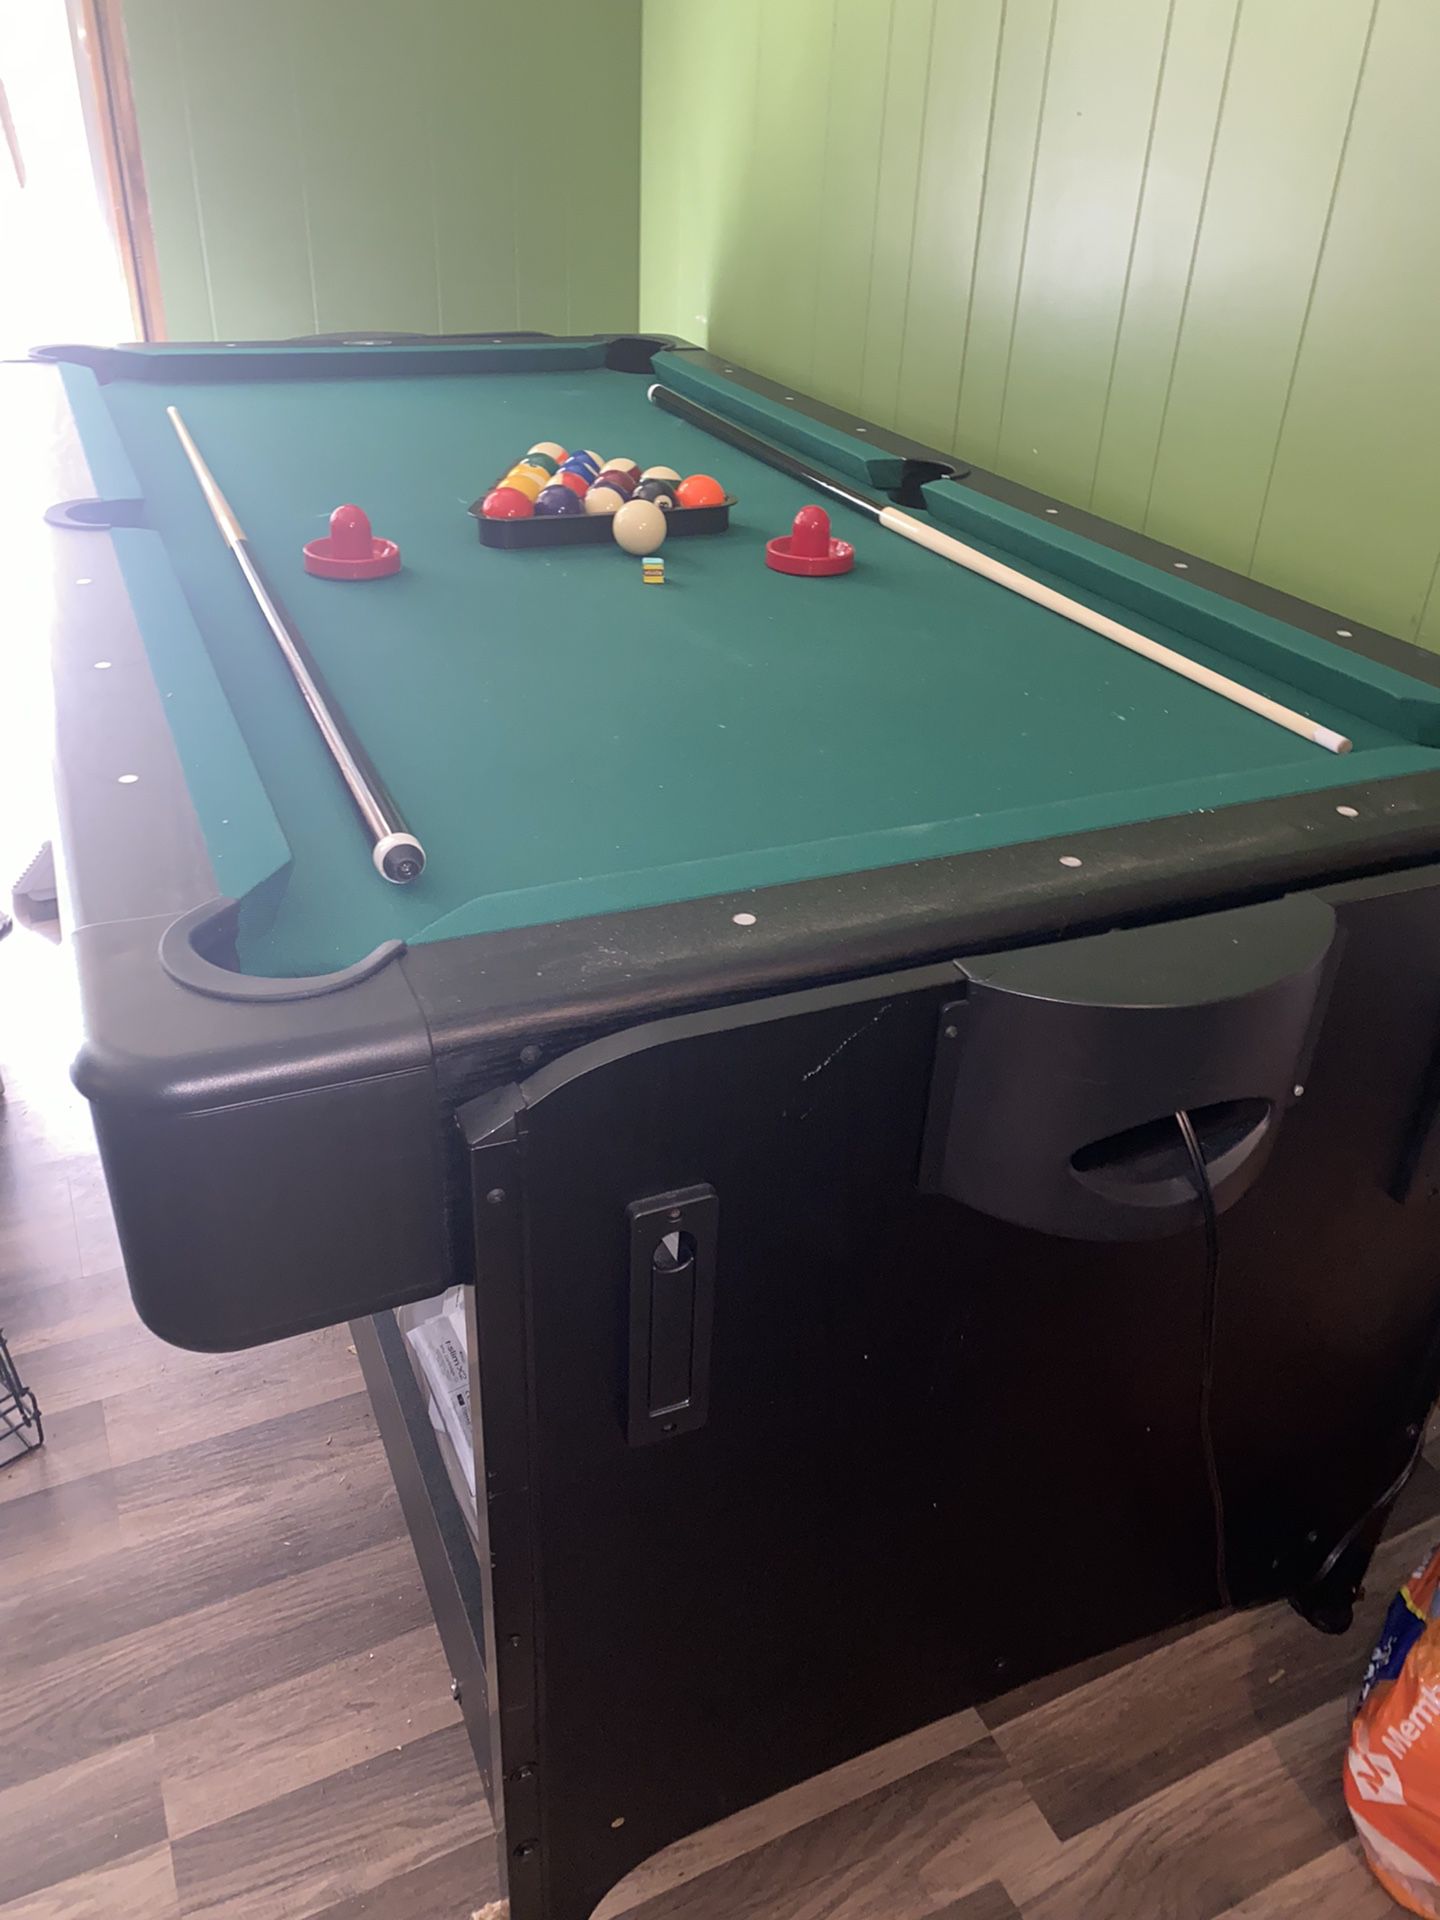 Pockey Table 2 In 1 Flip Table Pool And Air Hockey Cost 1500